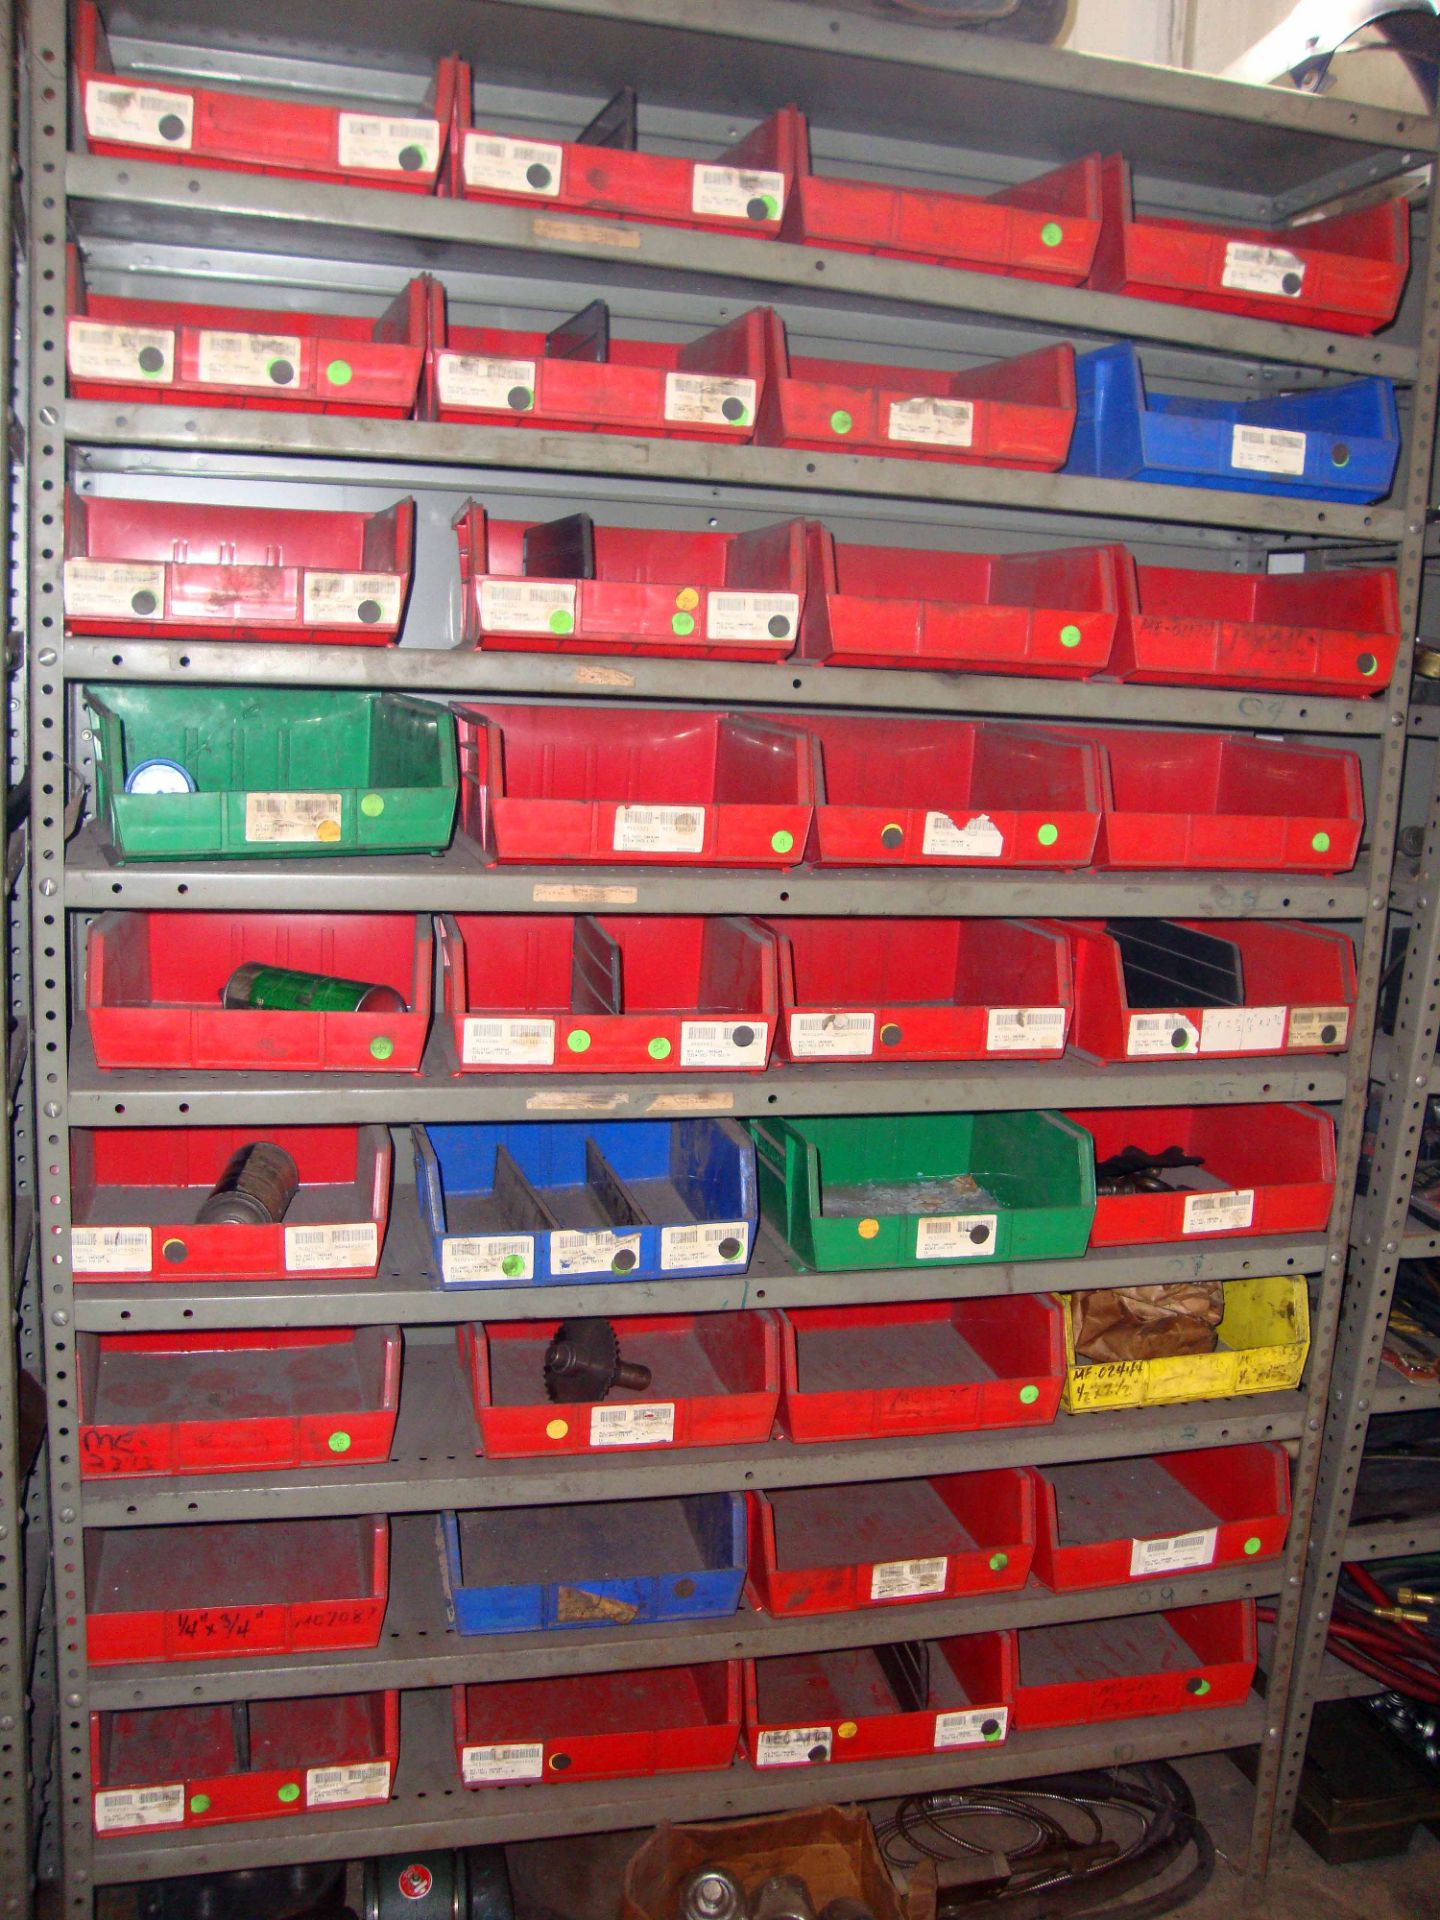 LOT OF STEEL SHELF SECTIONS (4), w/tooling, safety equipment, supplies, etc. - Image 4 of 6